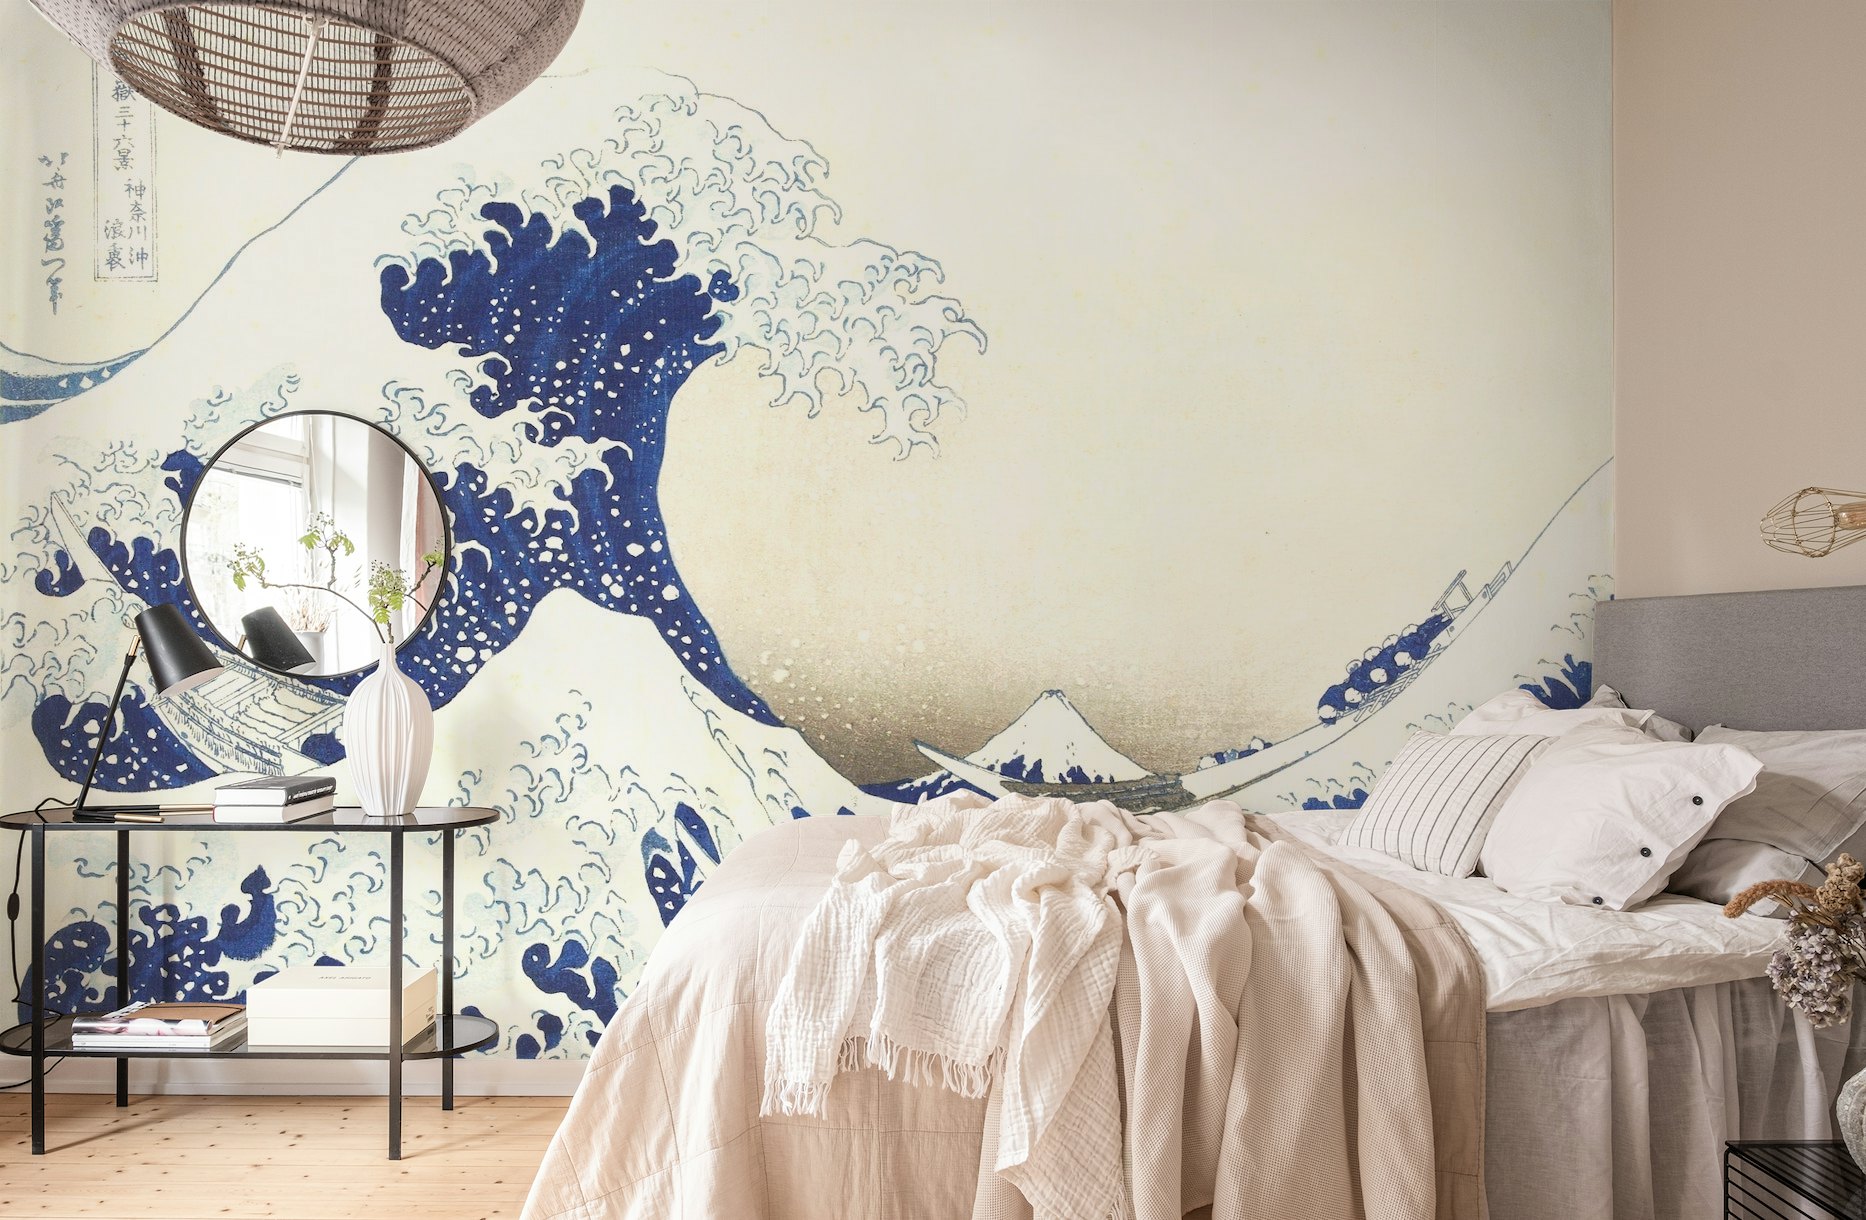 Highly detailed Great Wave Wallpaper displaying impressive wave patterns